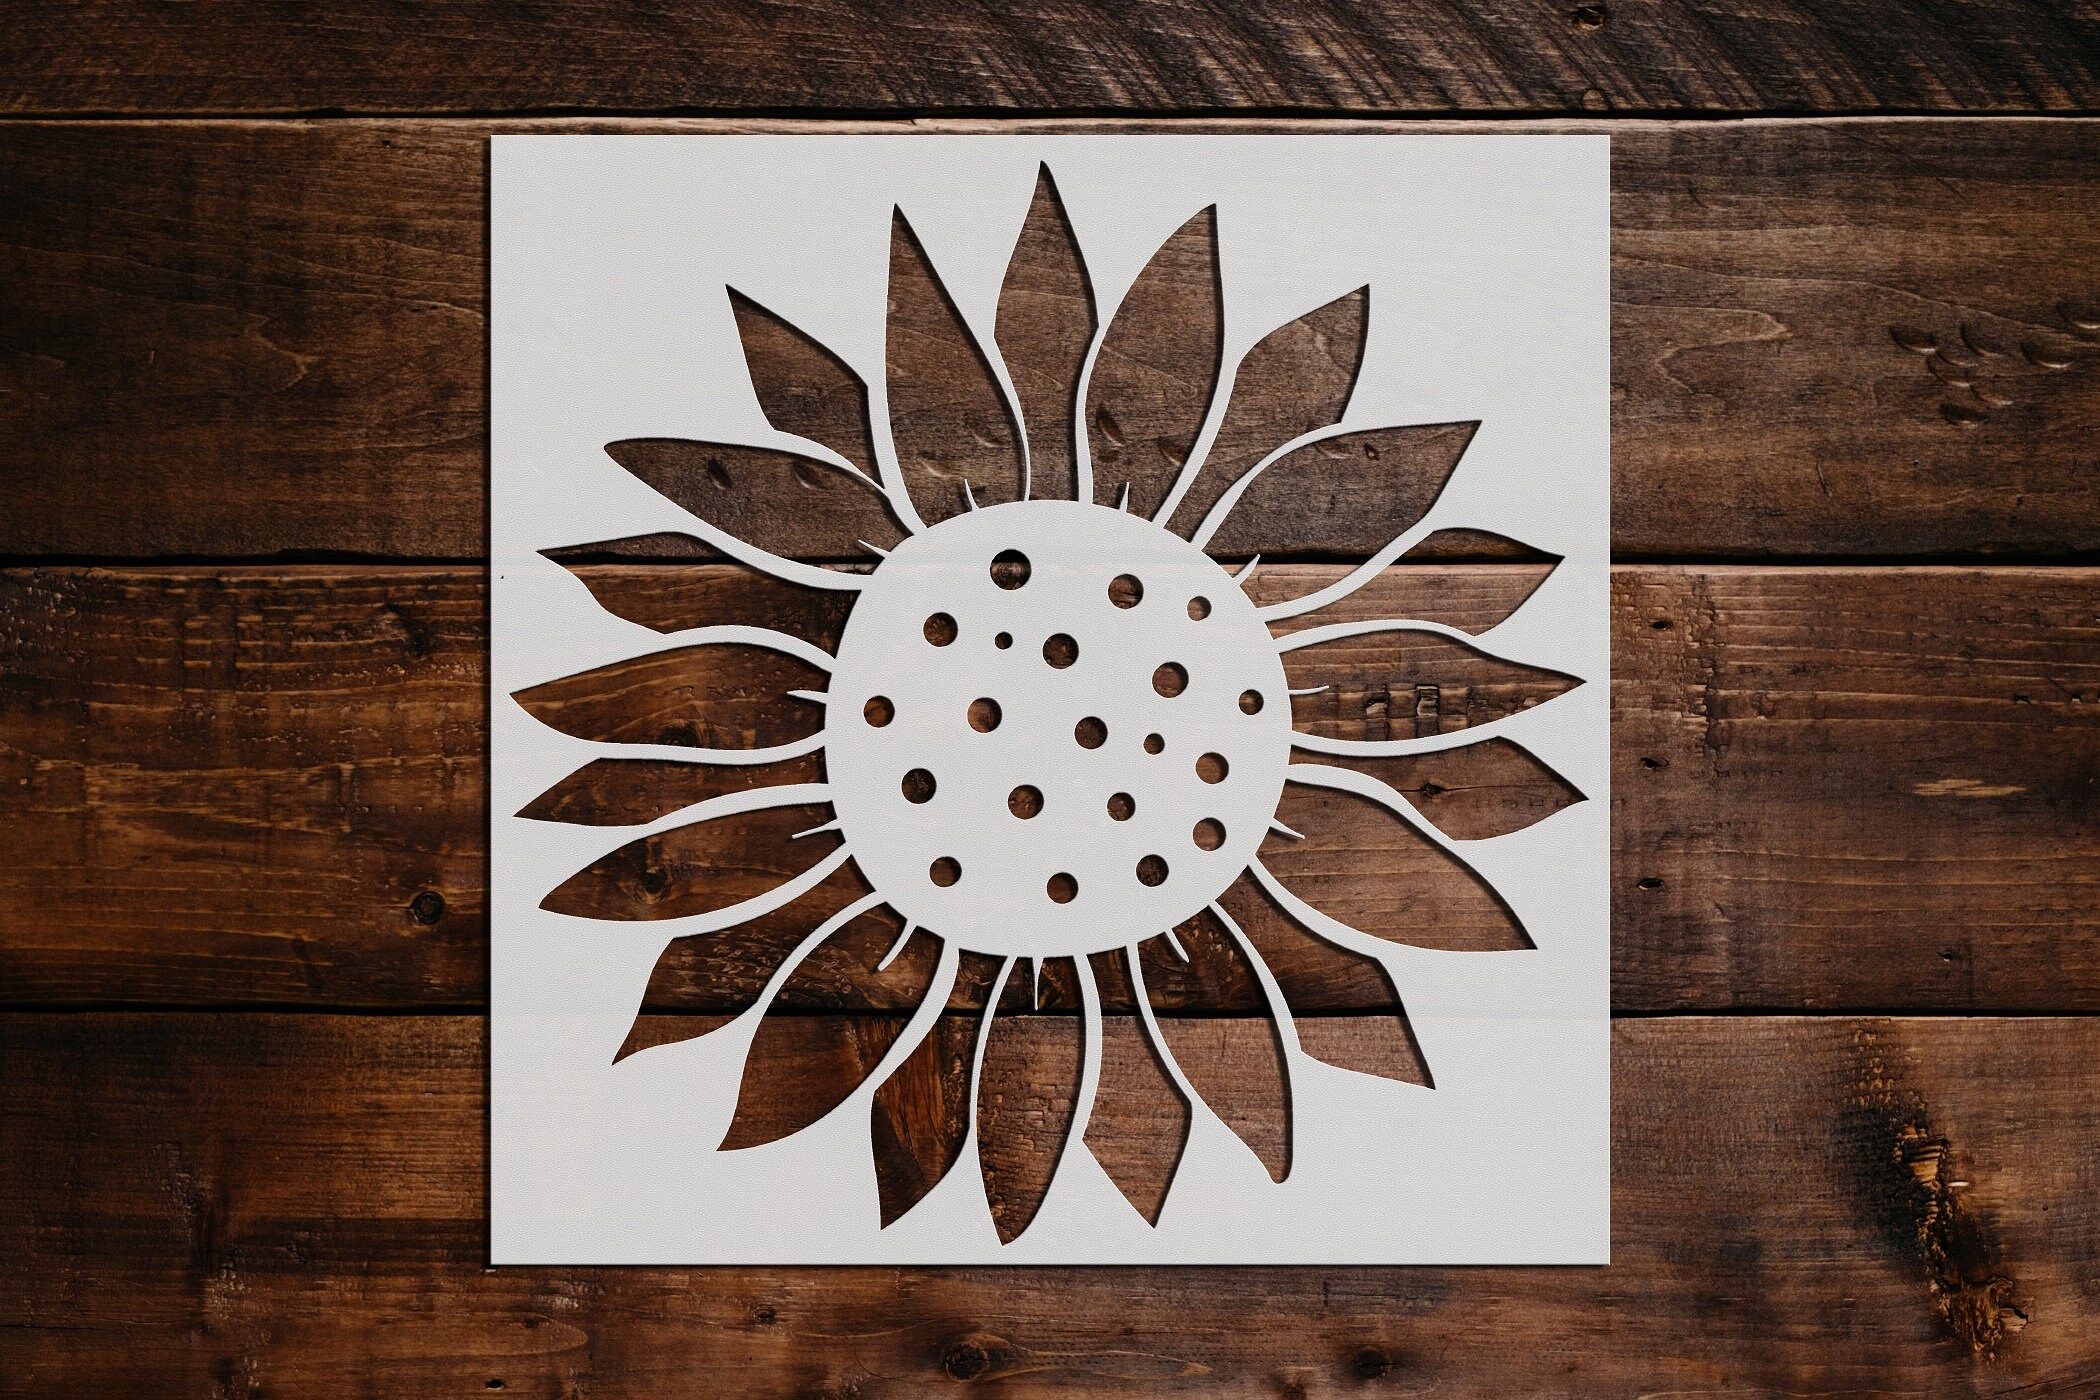  DLY LIFESTYLE Sunflower Stencil for Painting on Wood, Canvas,  Paper, Fabric, Walls and Furniture - Row of Sunflowers Stencil - 8x6 Inches  - Reusable DIY Art and Craft Stencils 